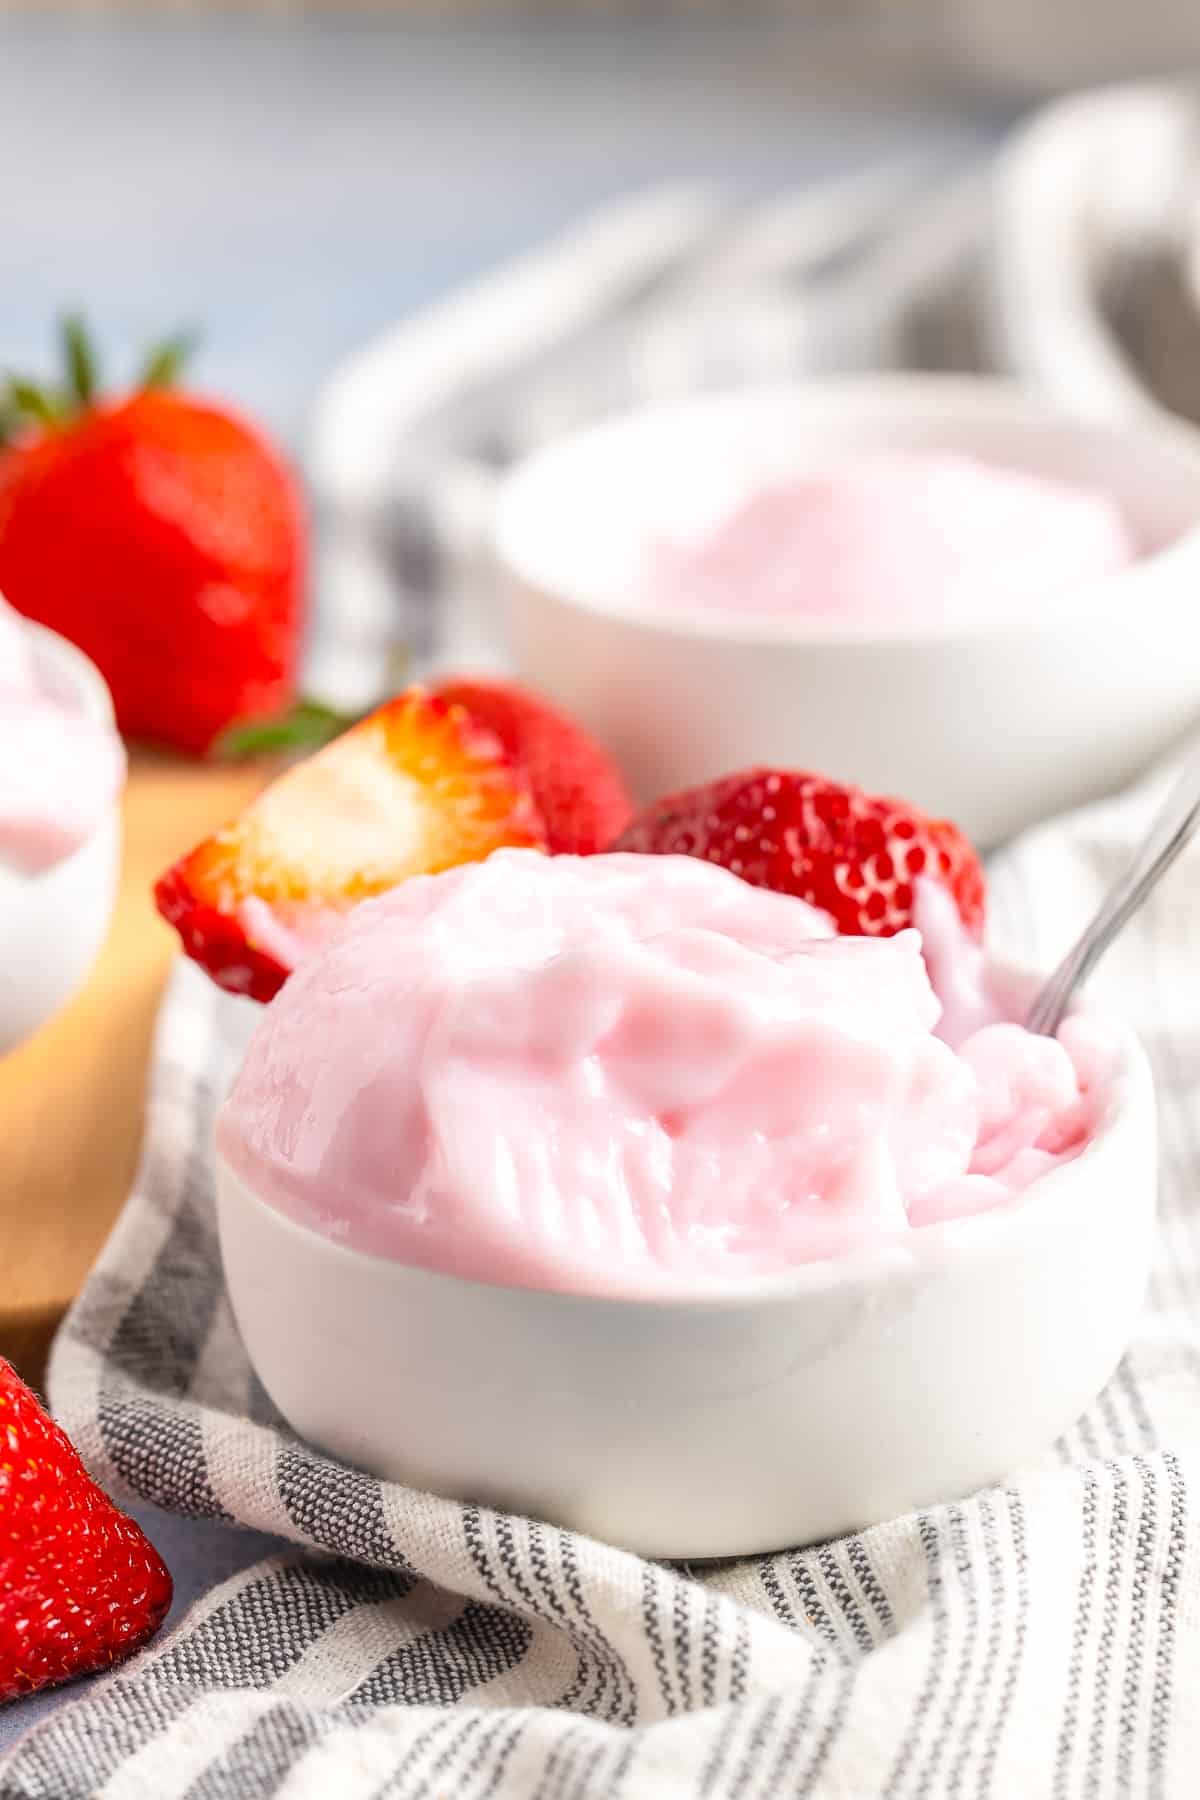 Frozen Yogurt in cups with a bite taken out